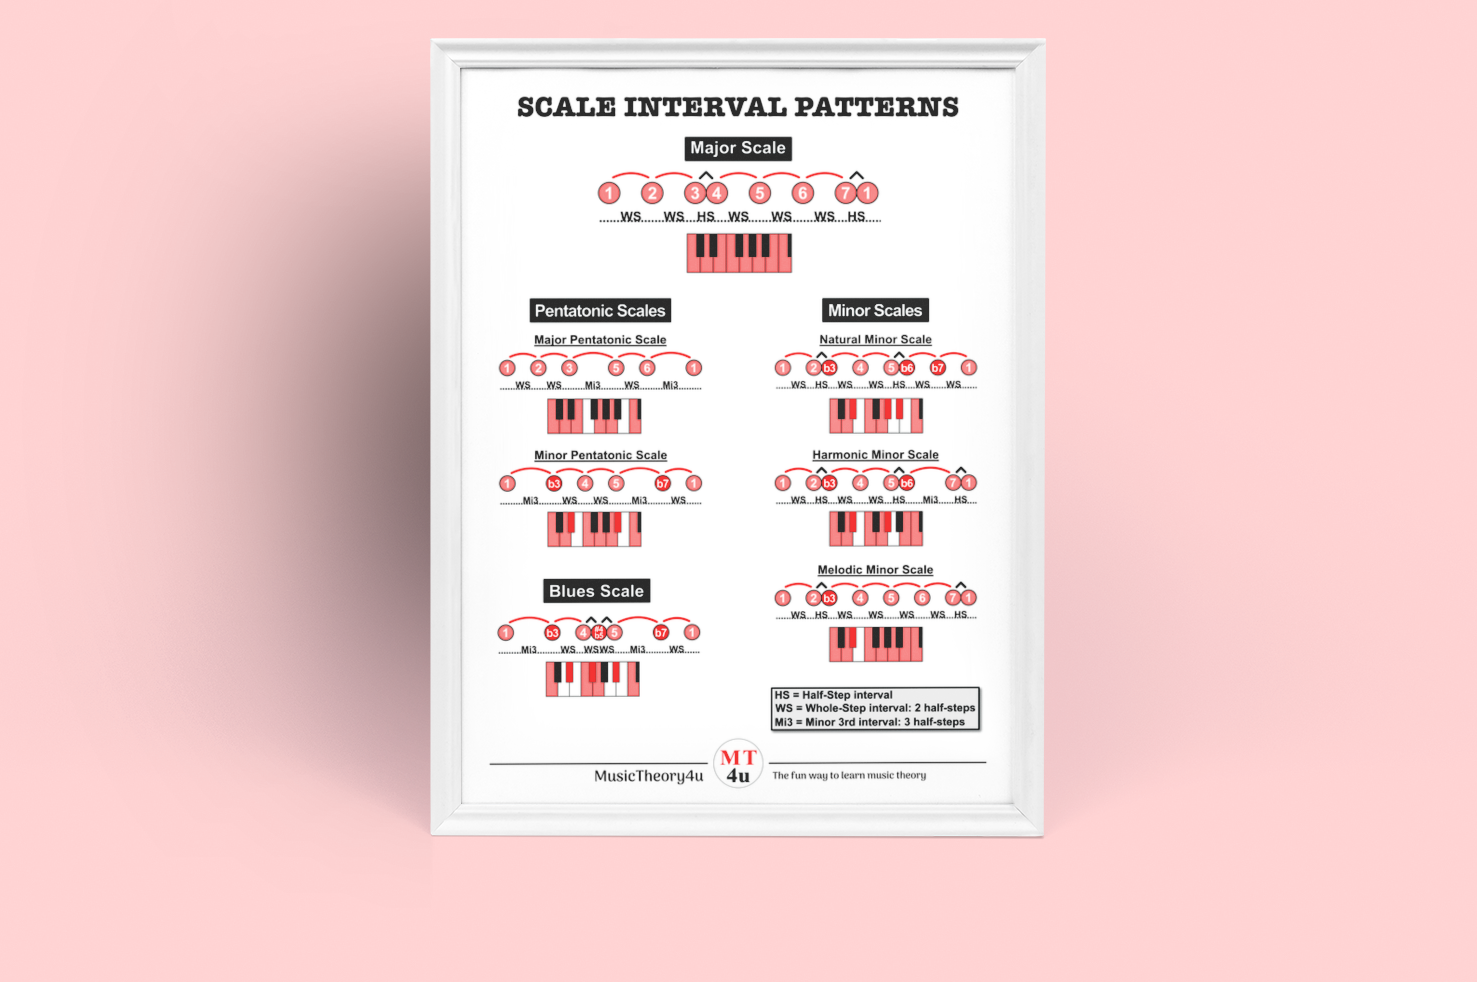 Scale interval patterns